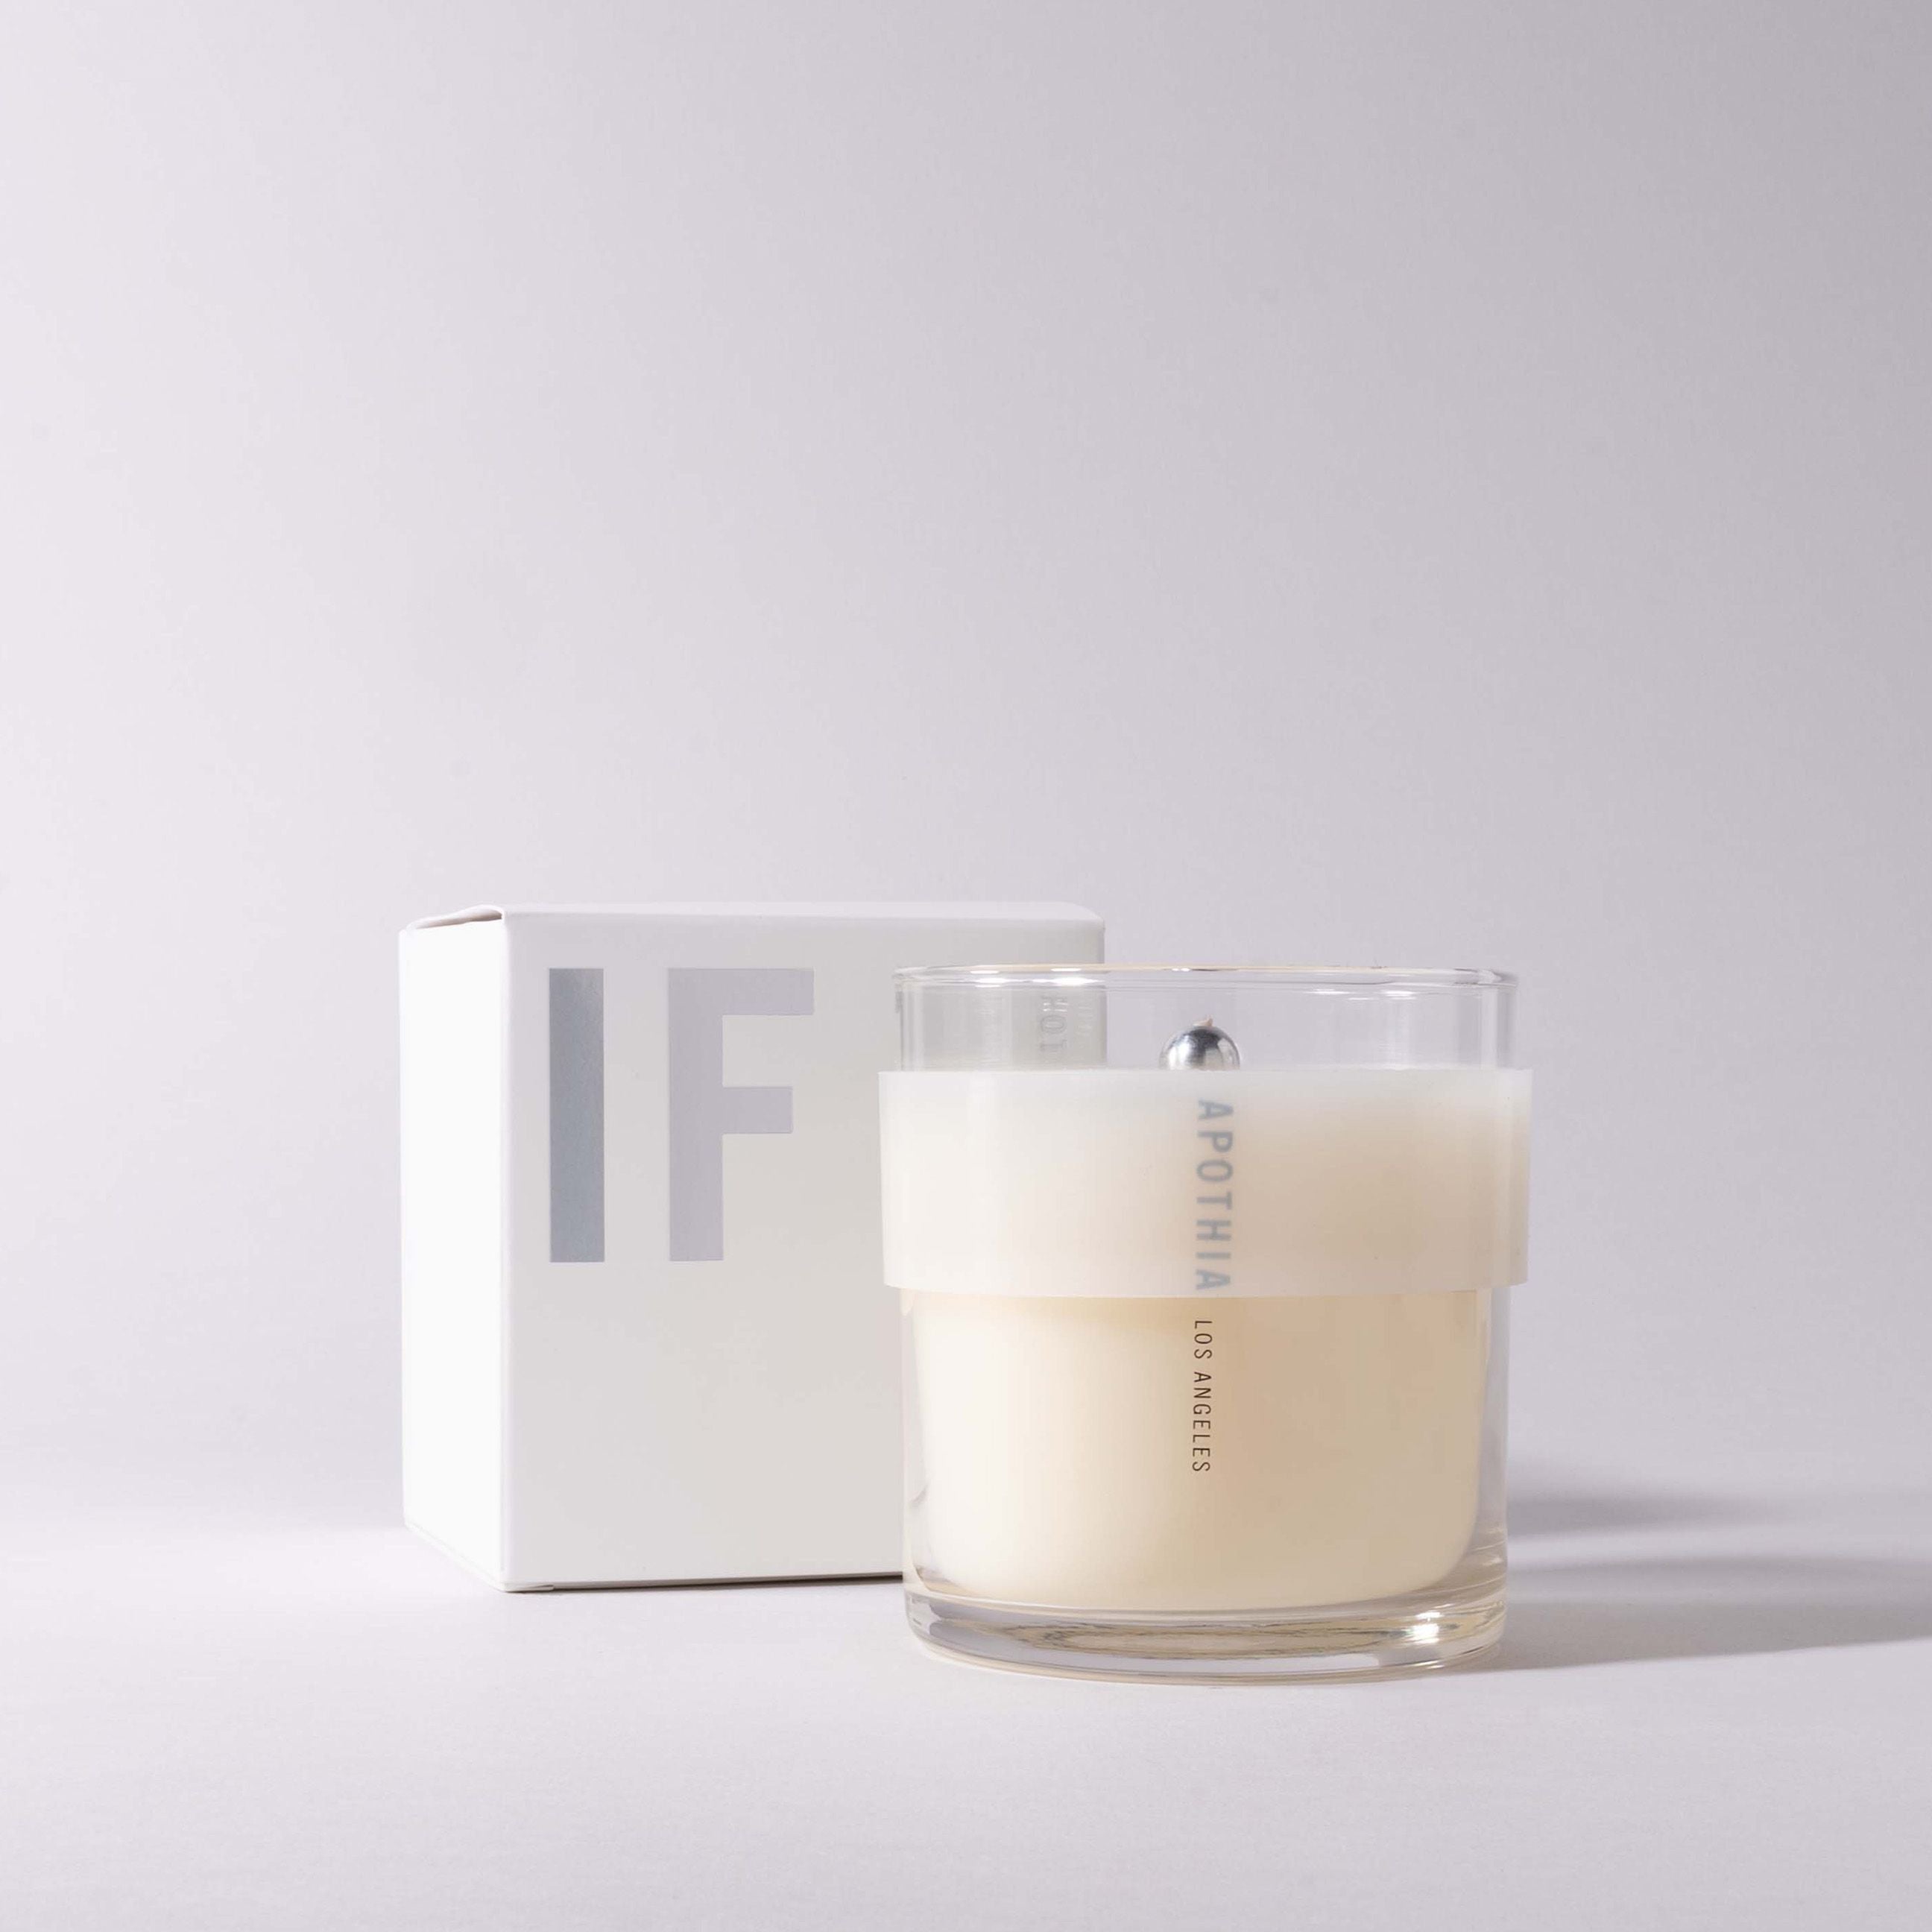 IF   Blooming White Flowers x Citrus   Candle